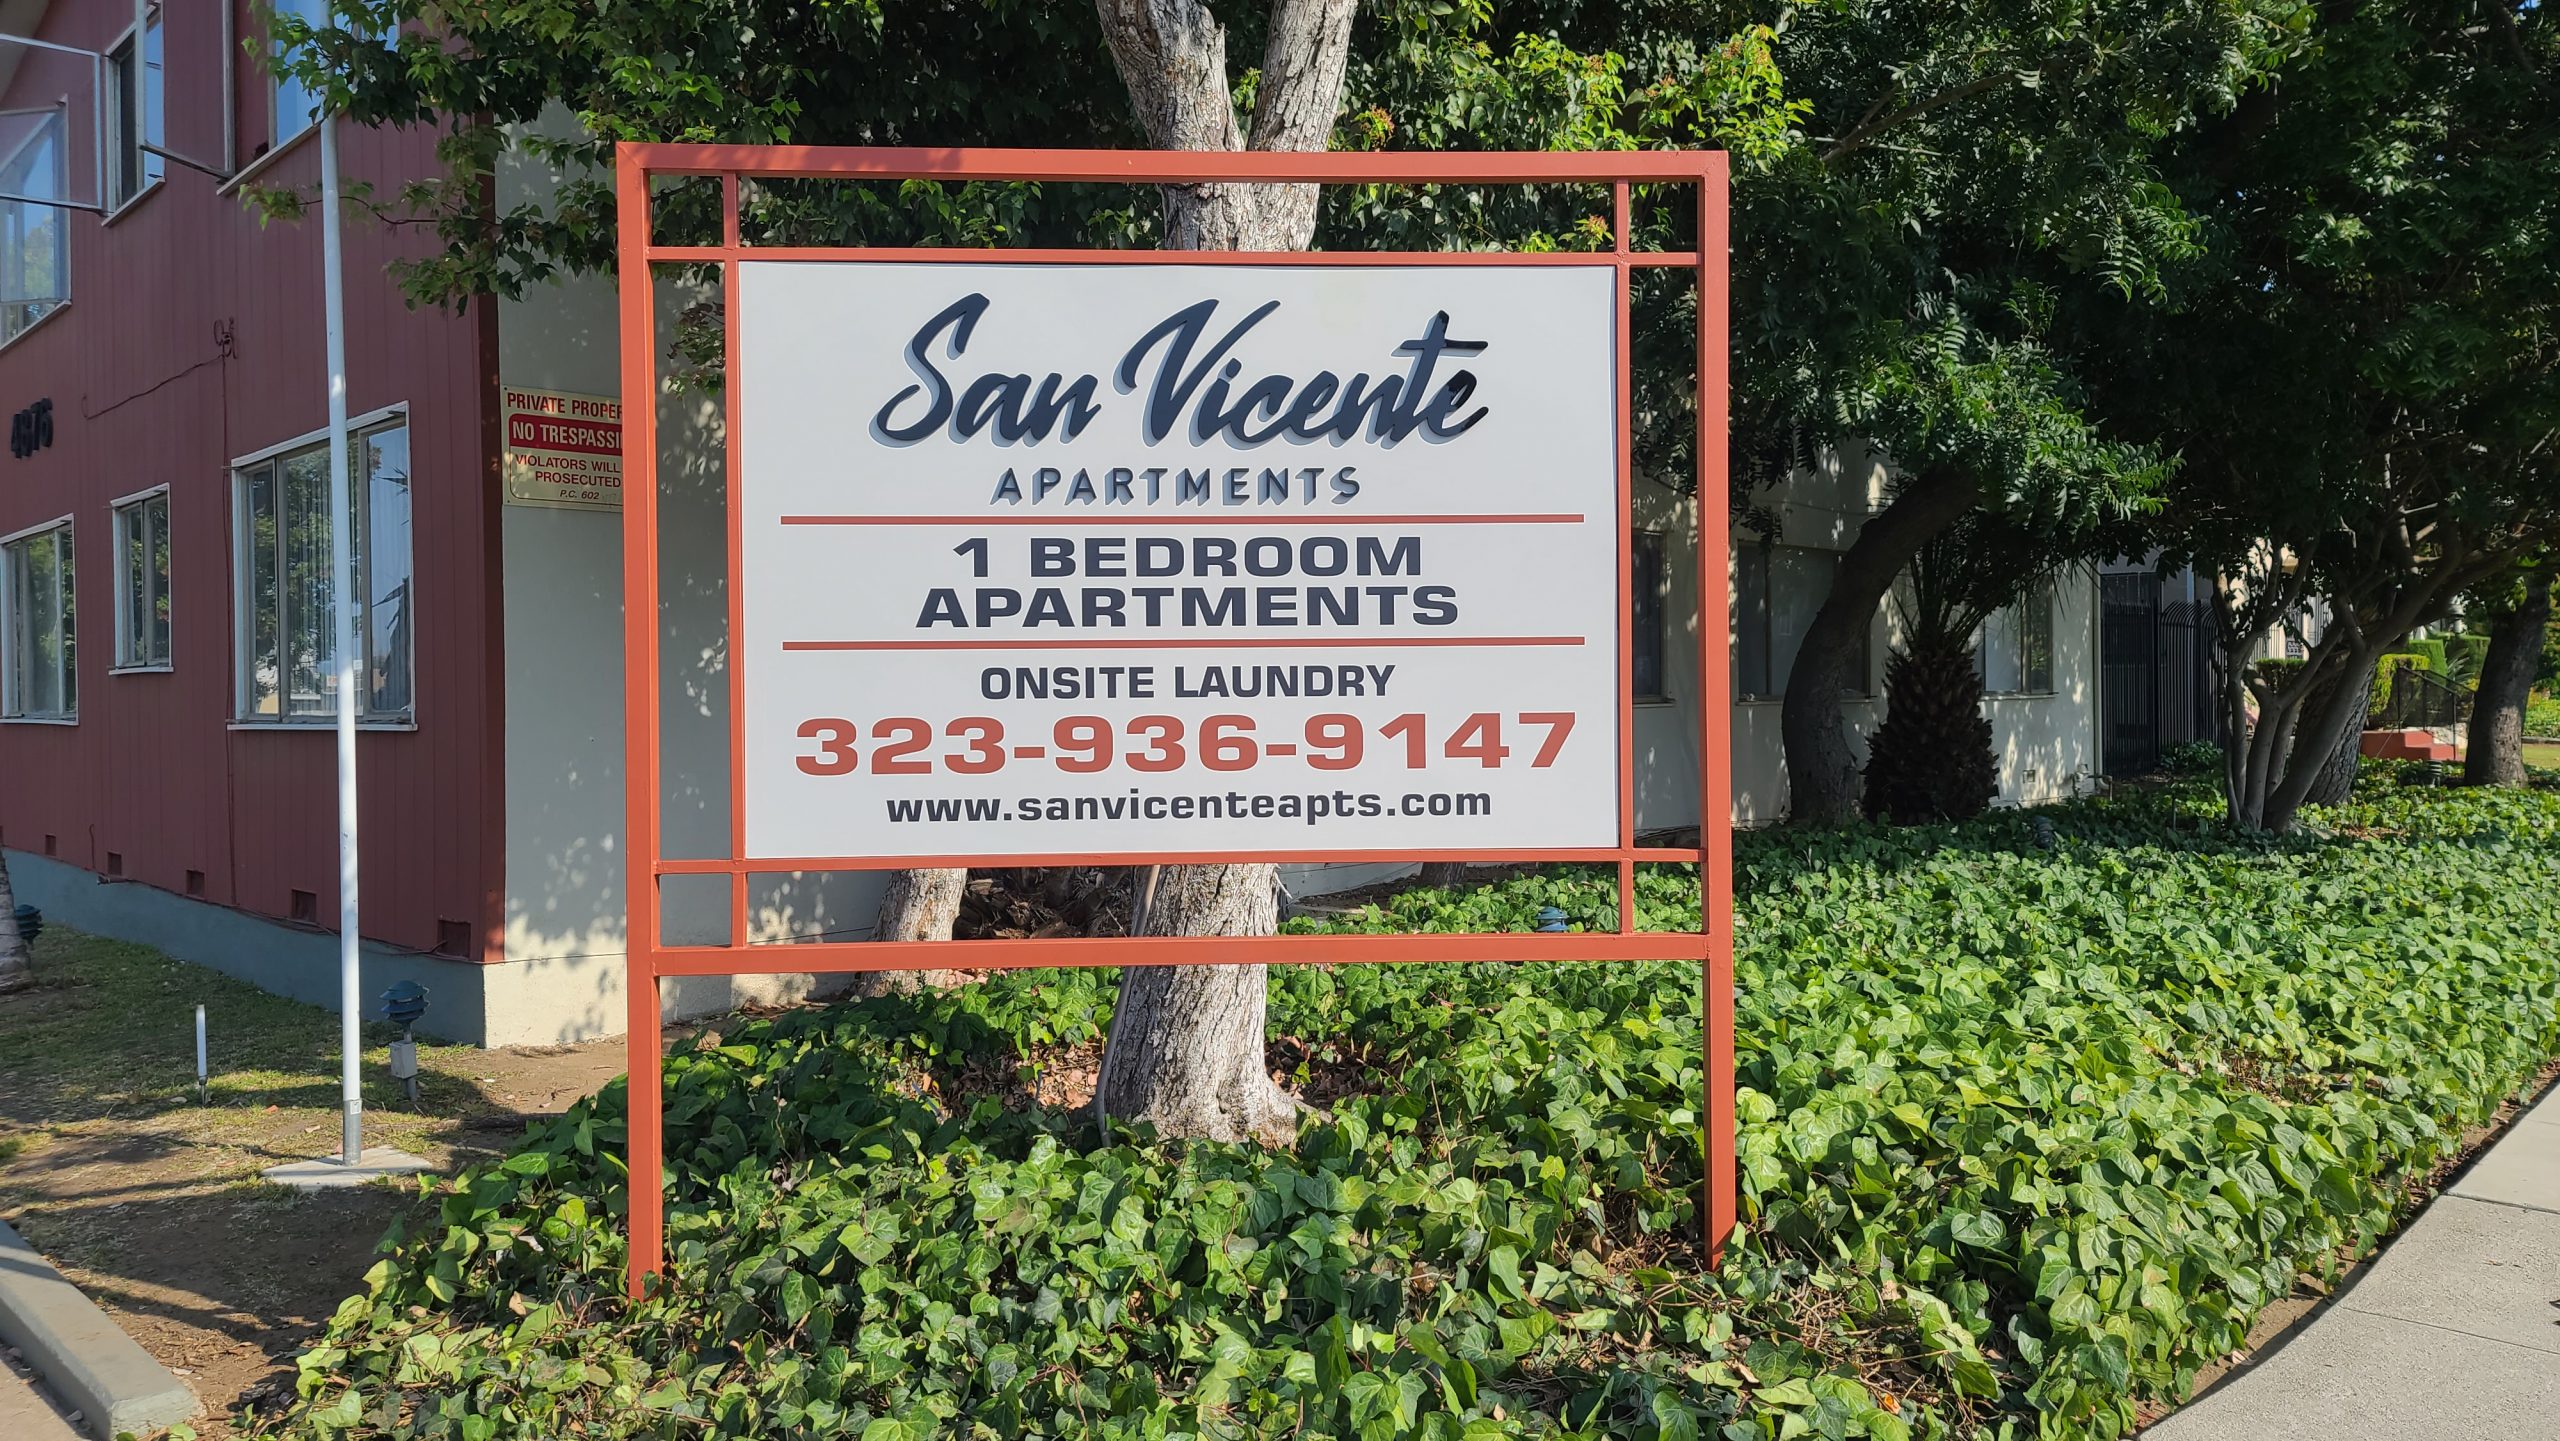 This is the post and panel apartment advertisement sign we fabricated and installed for our friends at Jones and Jones, it displays details about their San Vicente property so interested customers will know more about the available units.